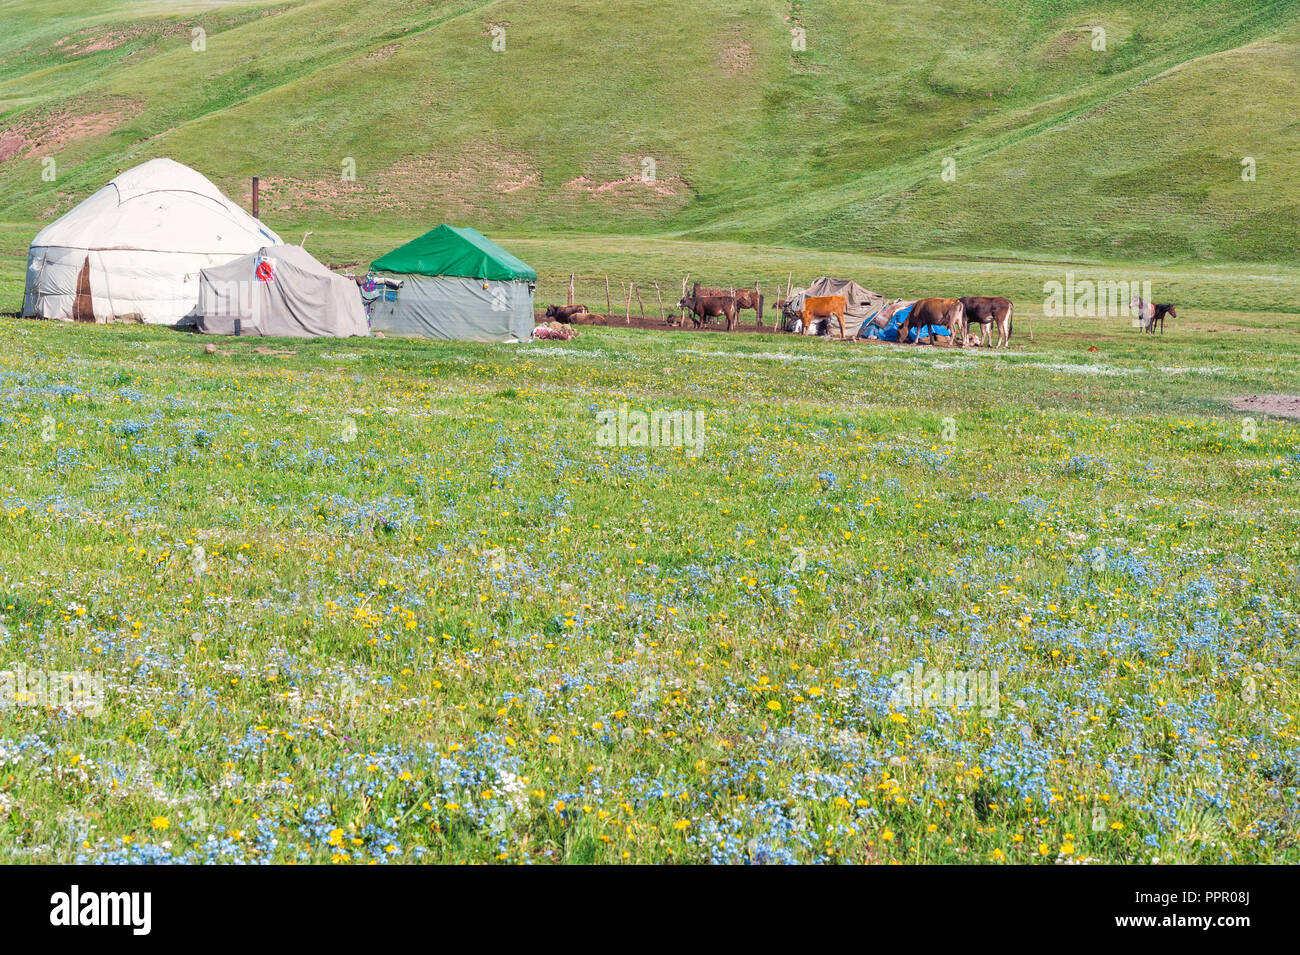 Nomad yurt camp, Song Kol Lake, Naryn province, Kyrgyzstan, Central Asia Stock Photo